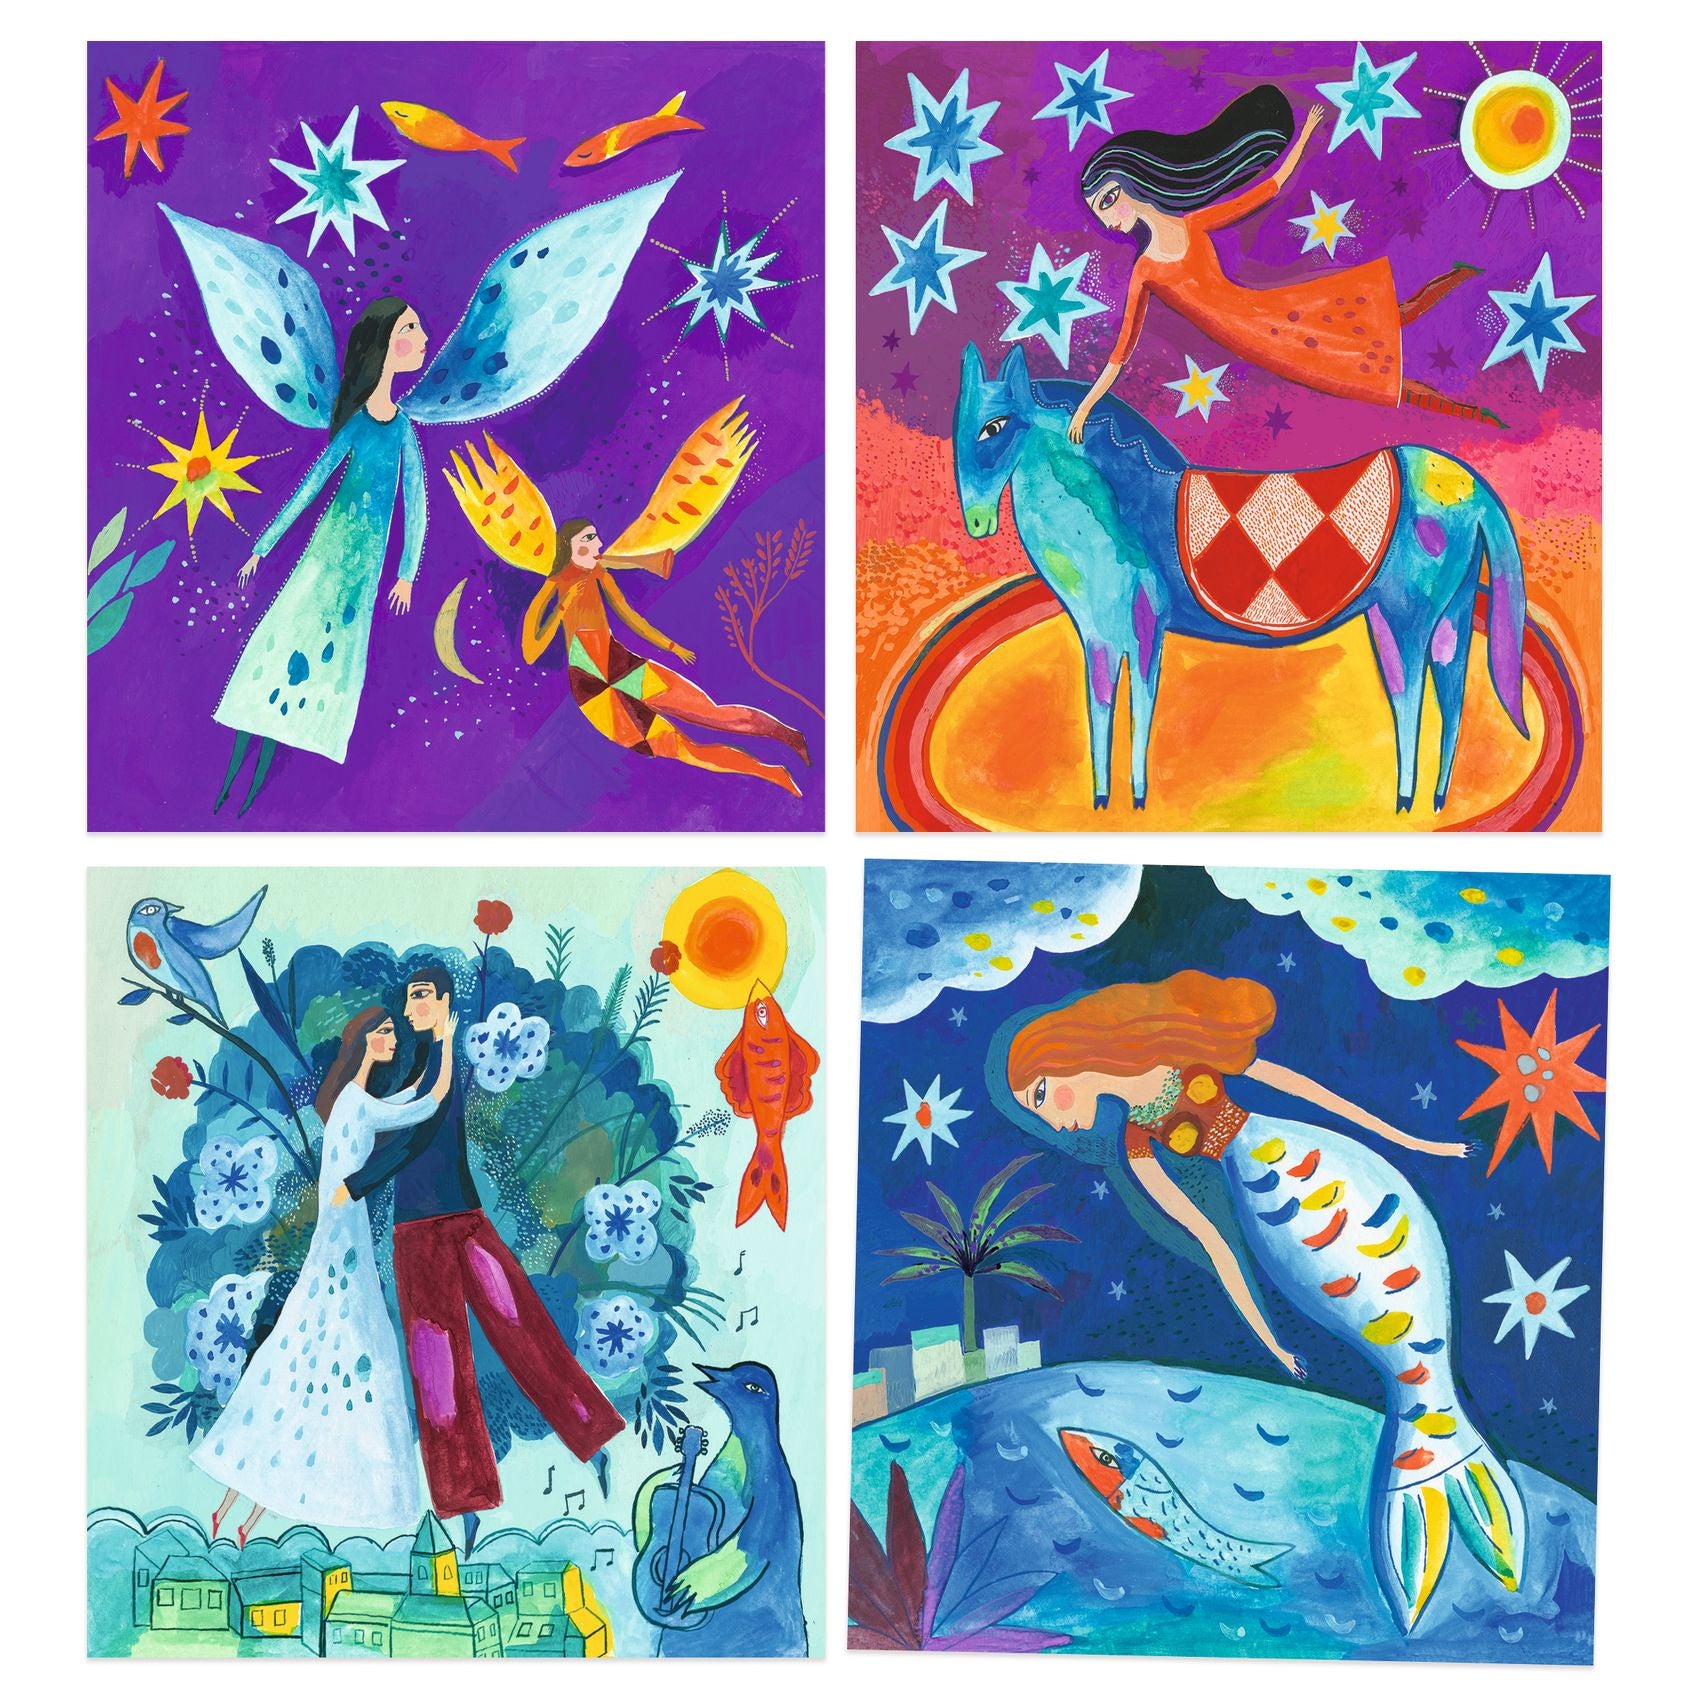 Inspired By -  Marc Chagall - In a dream